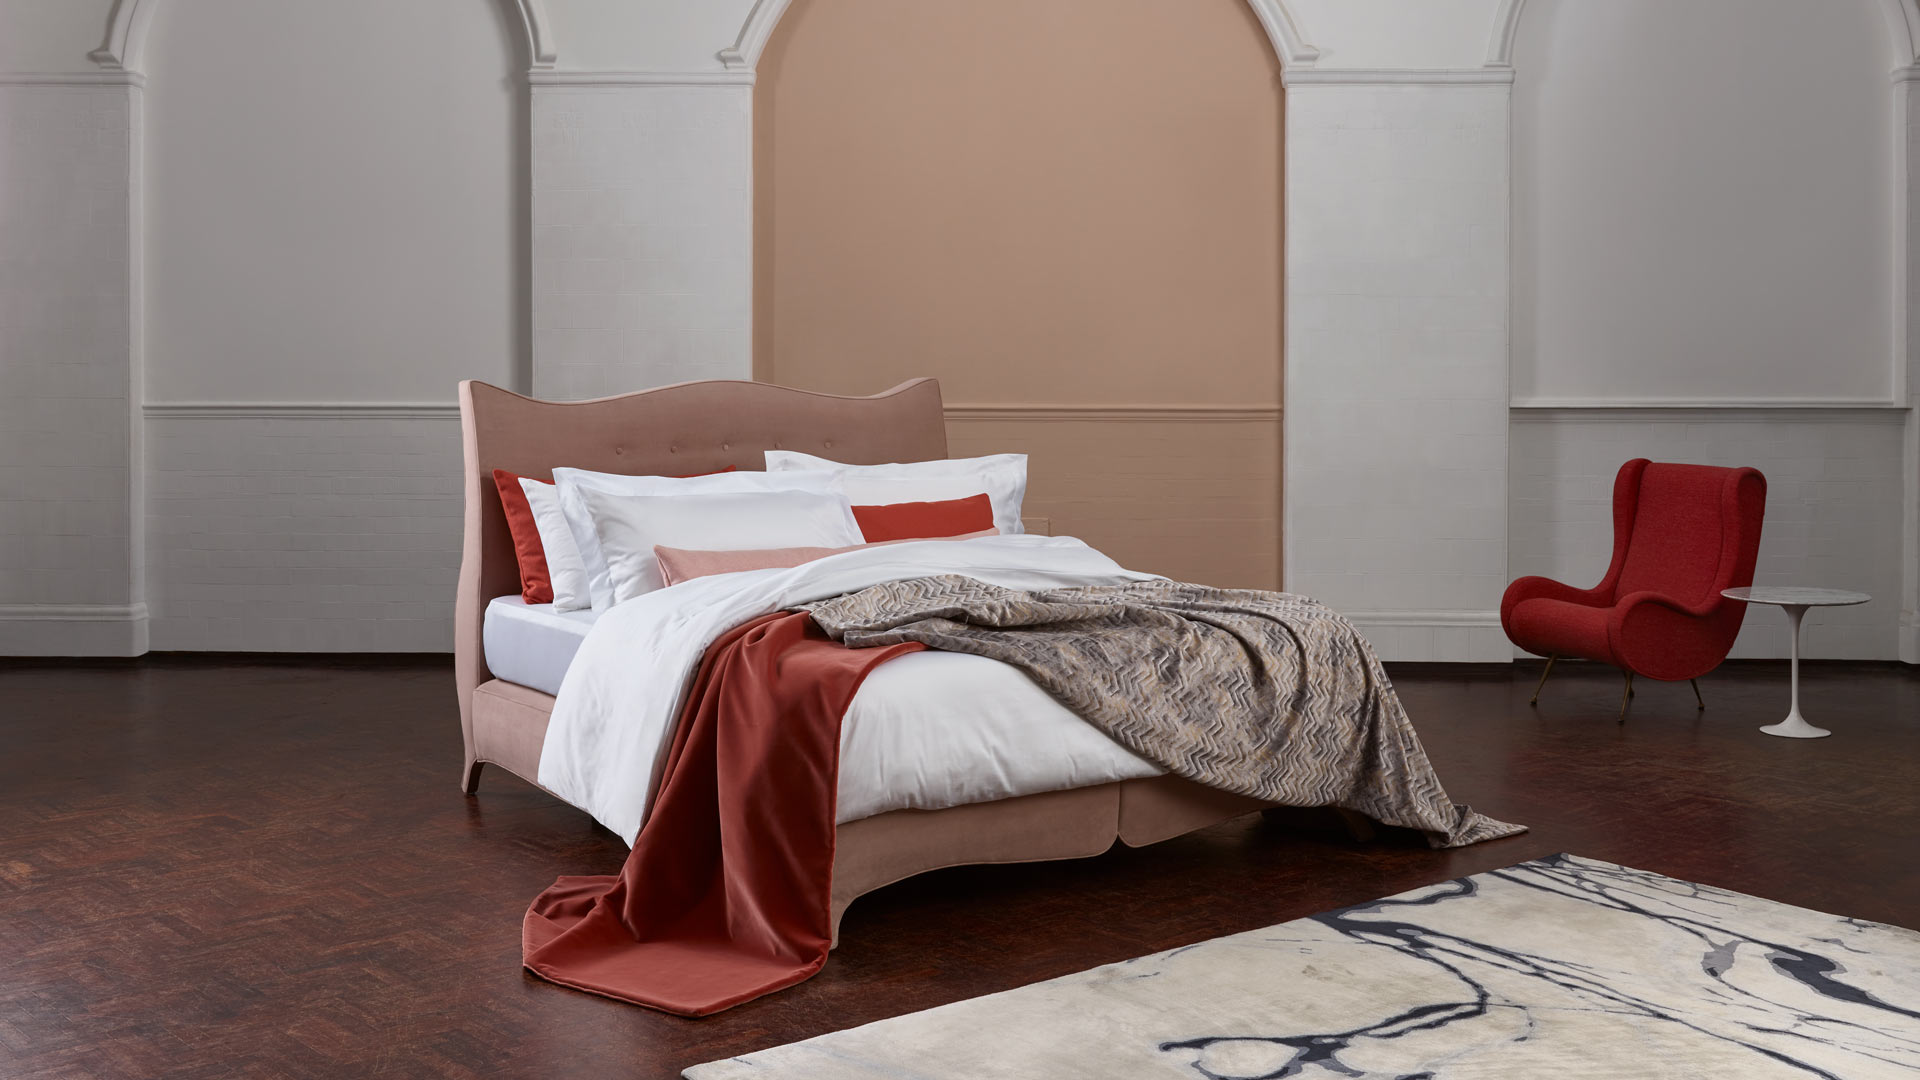 The Penelope bed dressed in The Dream bed linen range